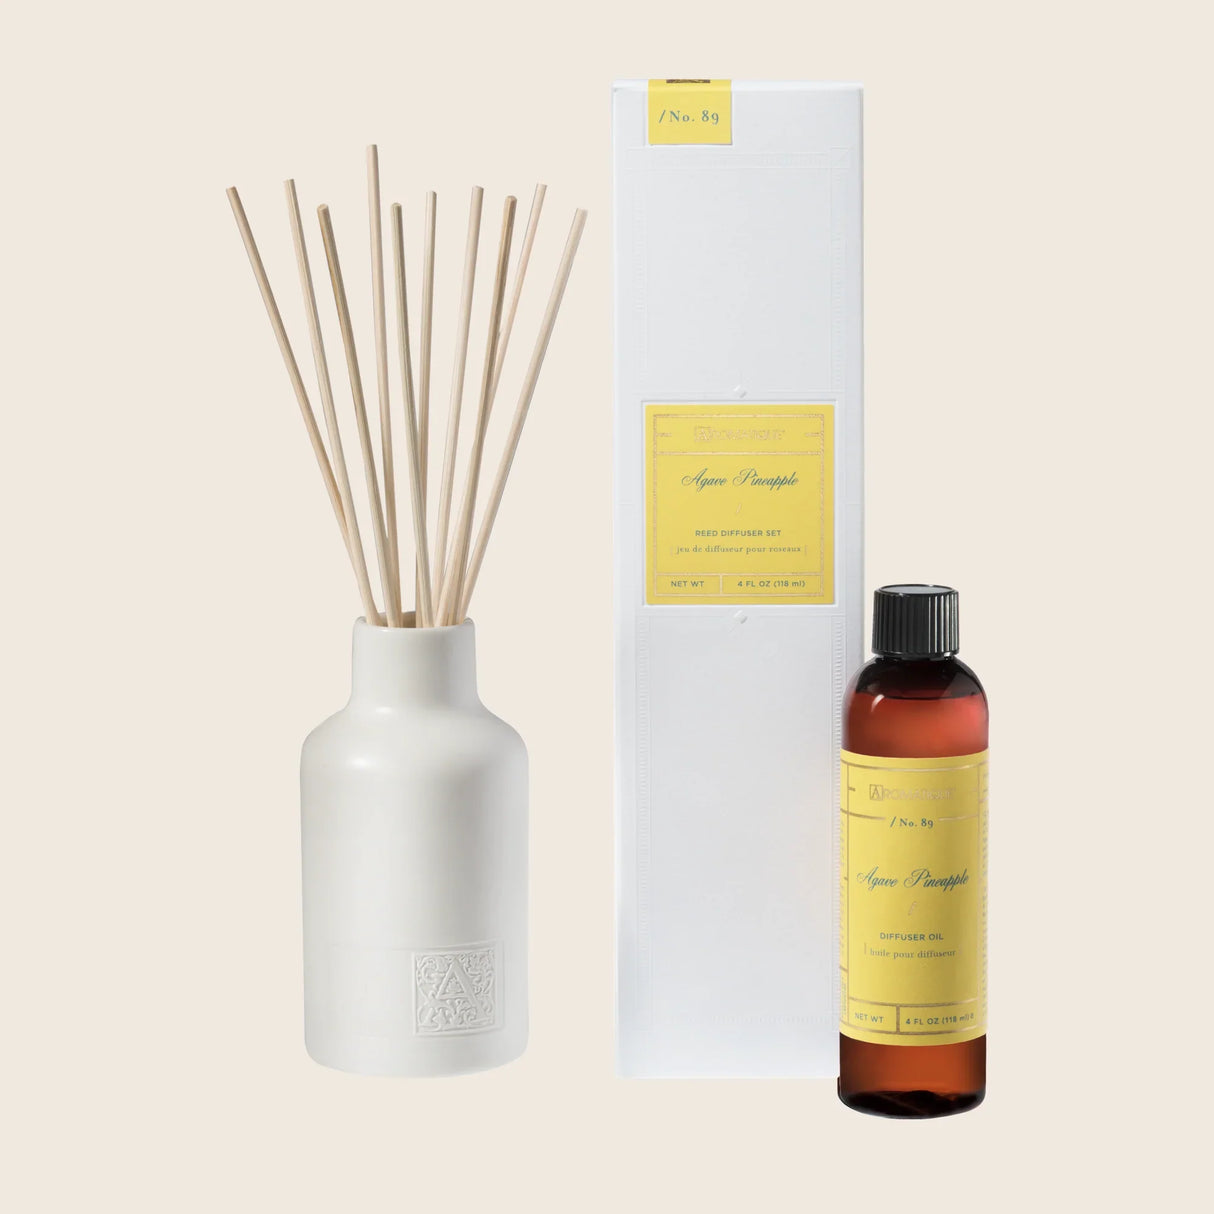 Aromatique Inc. - Reed Diffuser Set  Agave Pineapple